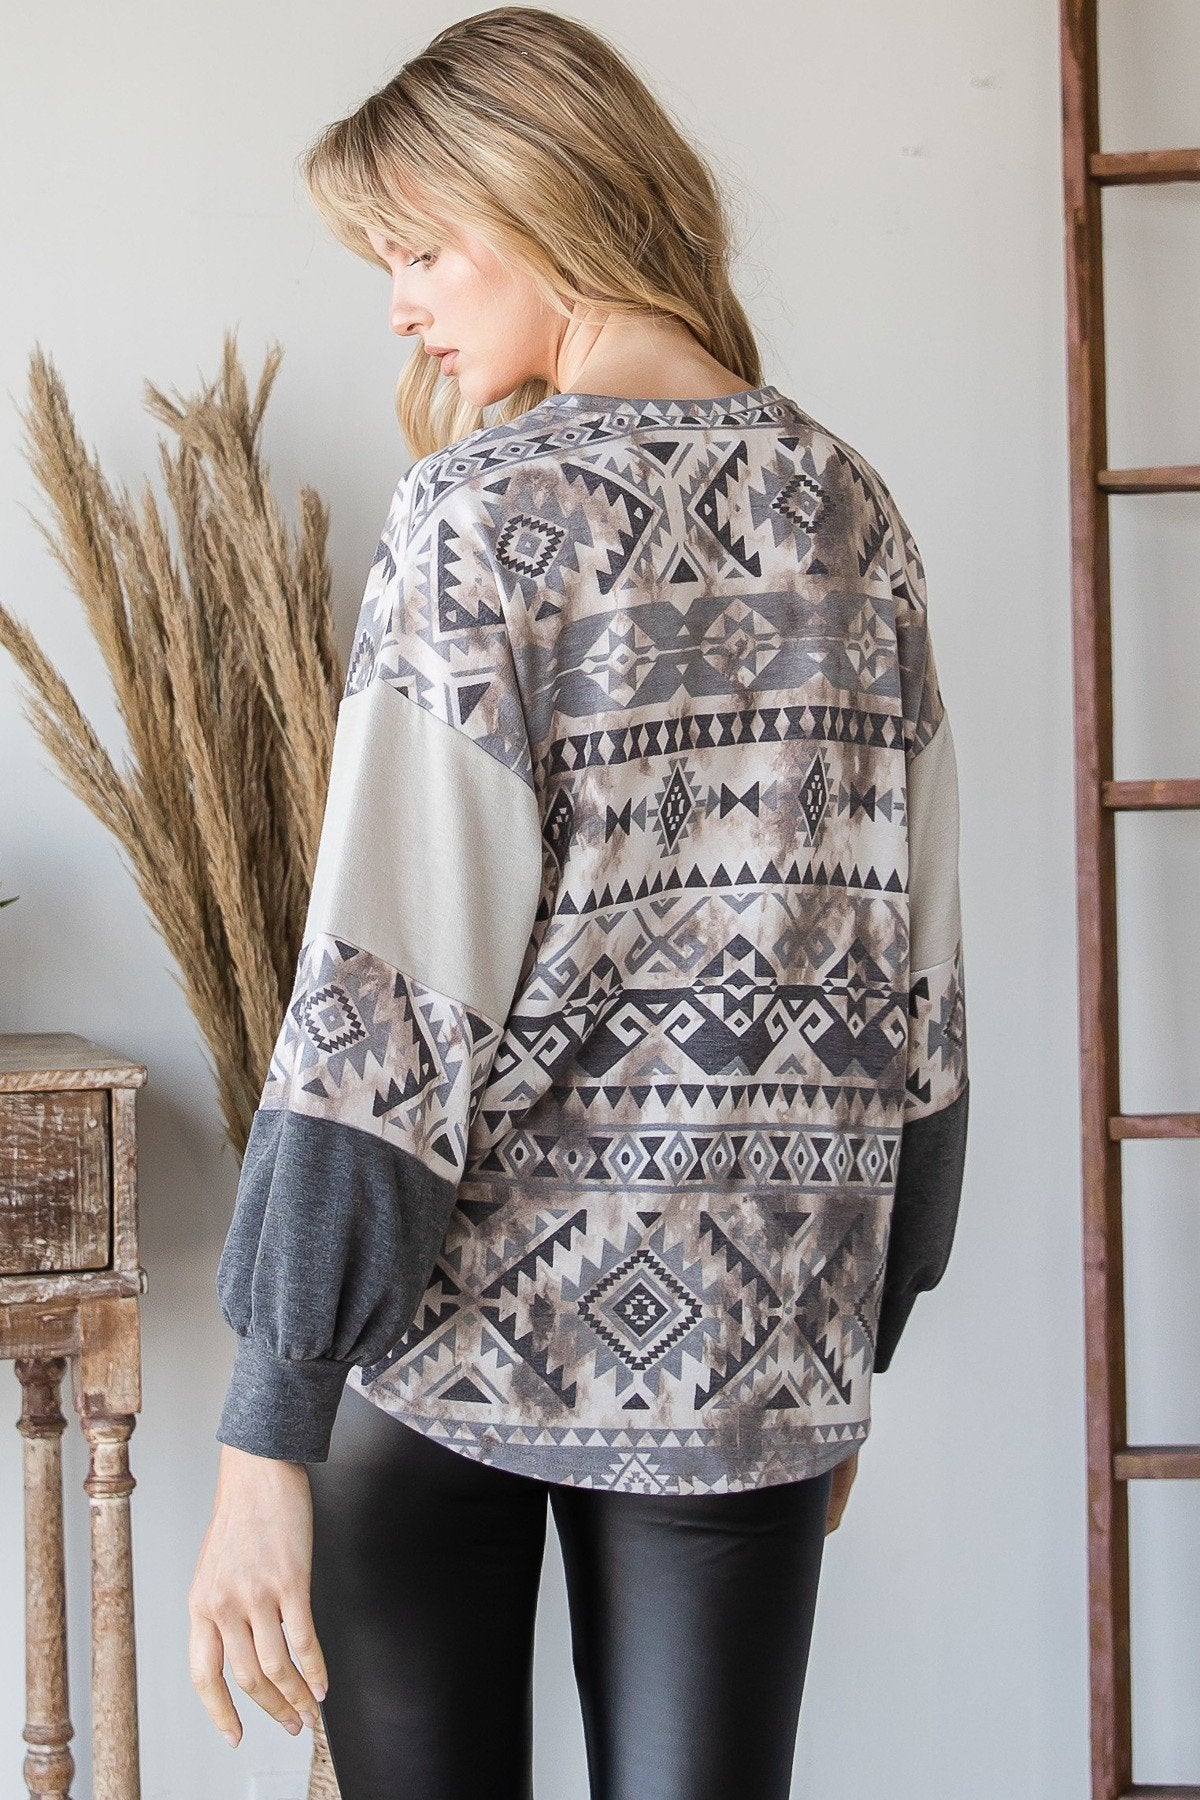 Our Best Rayon Blend Beautiful Aztec Print Long Ruffled Sleeve Self-Tie Knot Sweater (Charcoal)